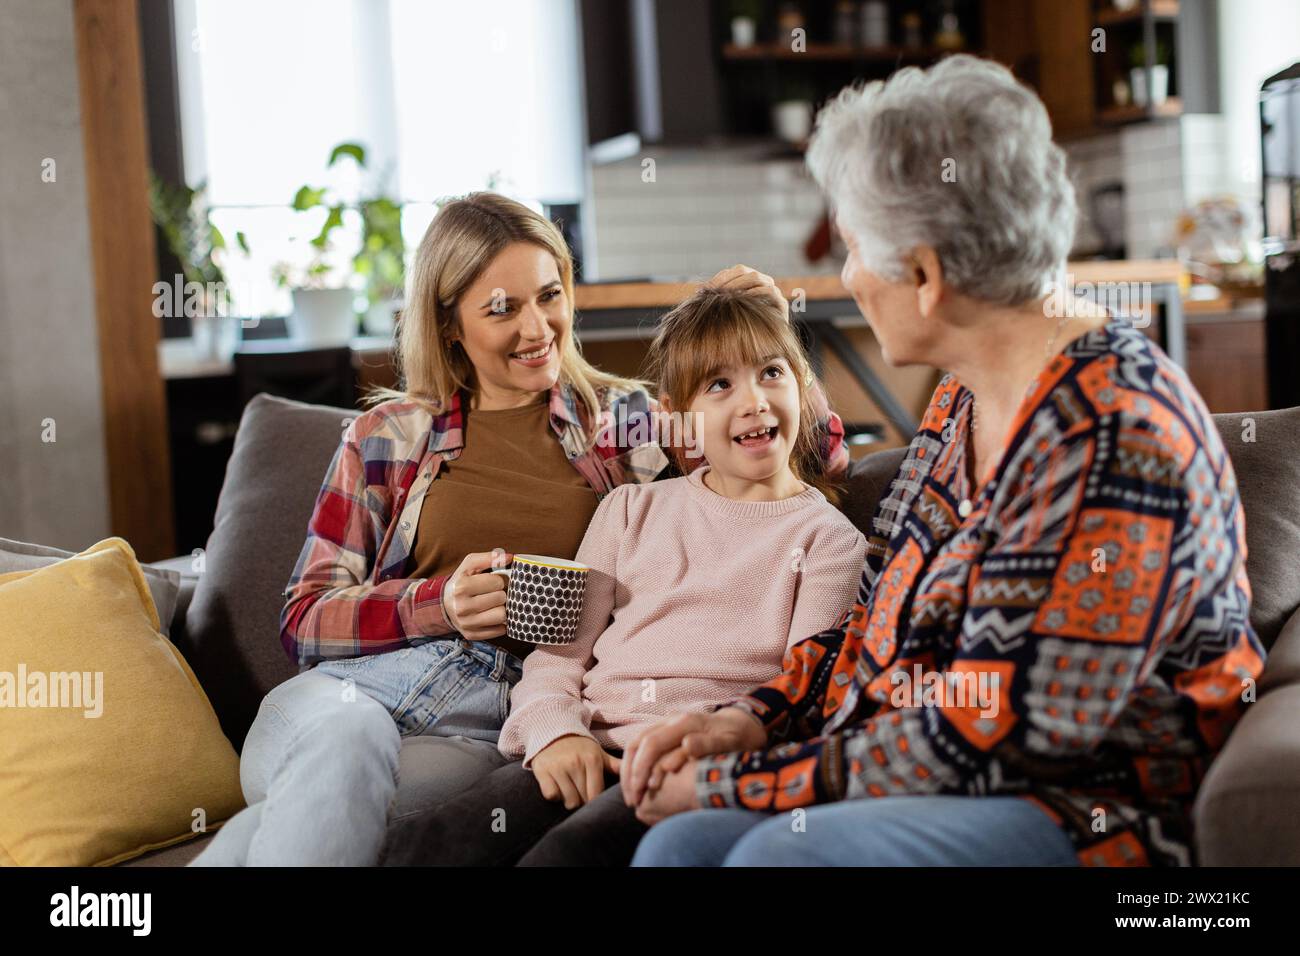 Three generations of women enjoy laughter and conversation on a comfortable living room couch Stock Photo